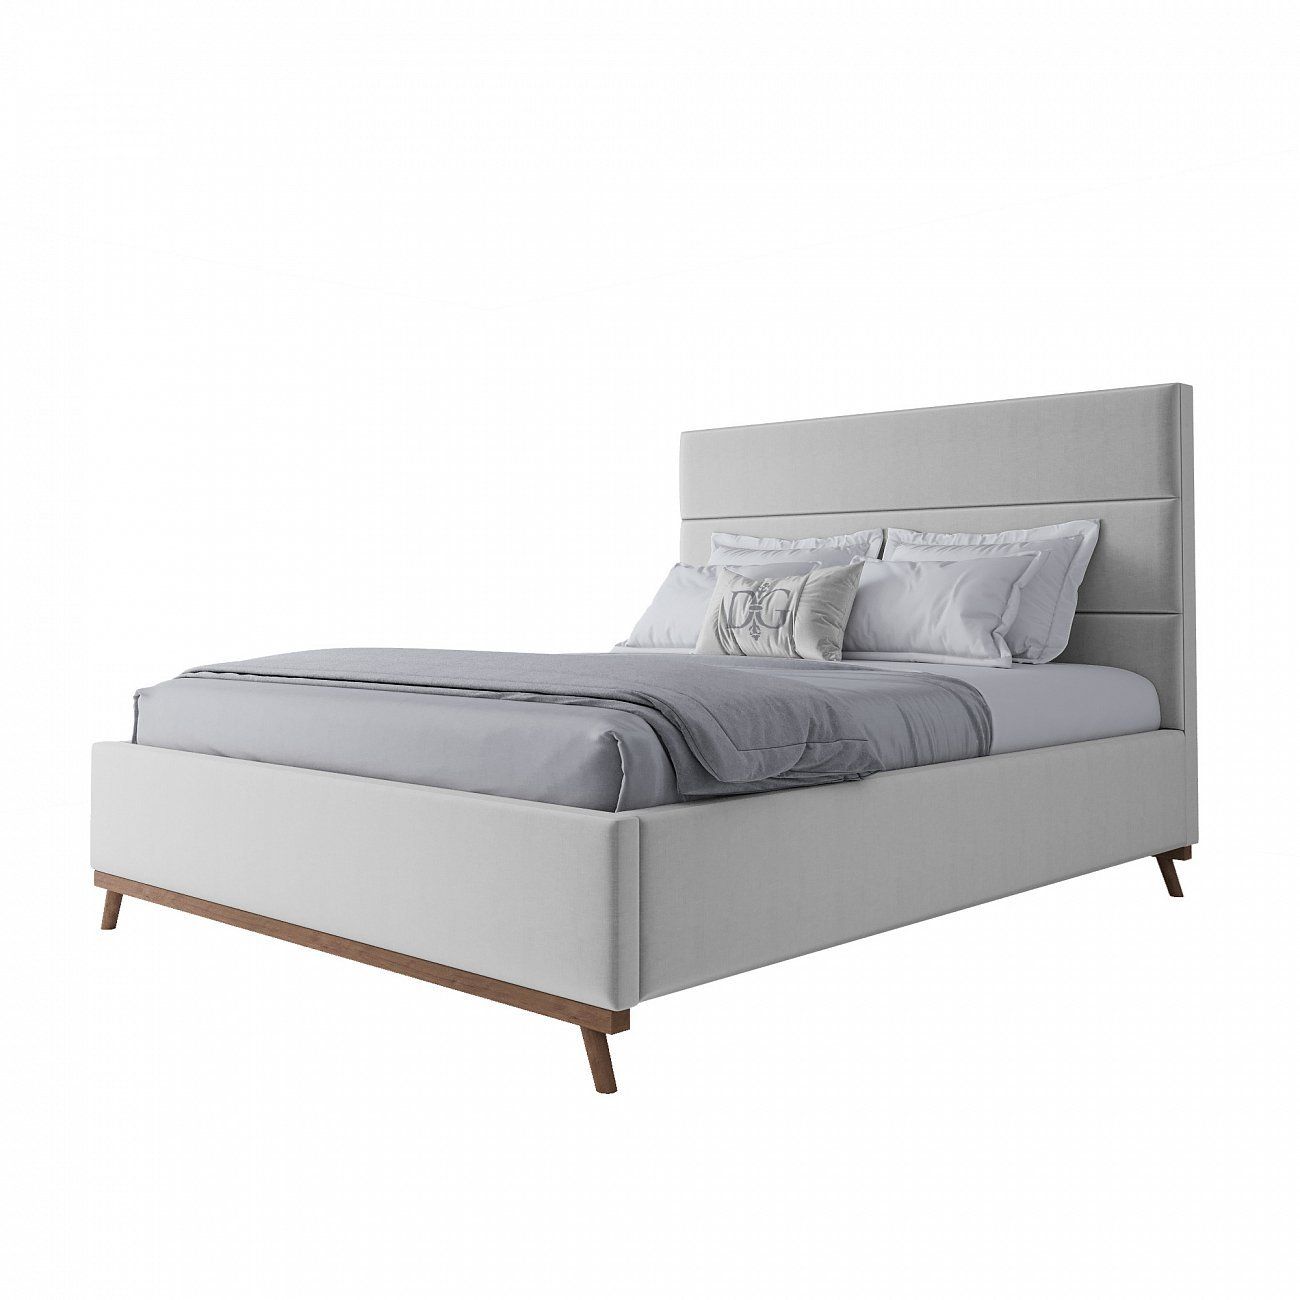 Double bed 160x200 white Cooper Snowfall